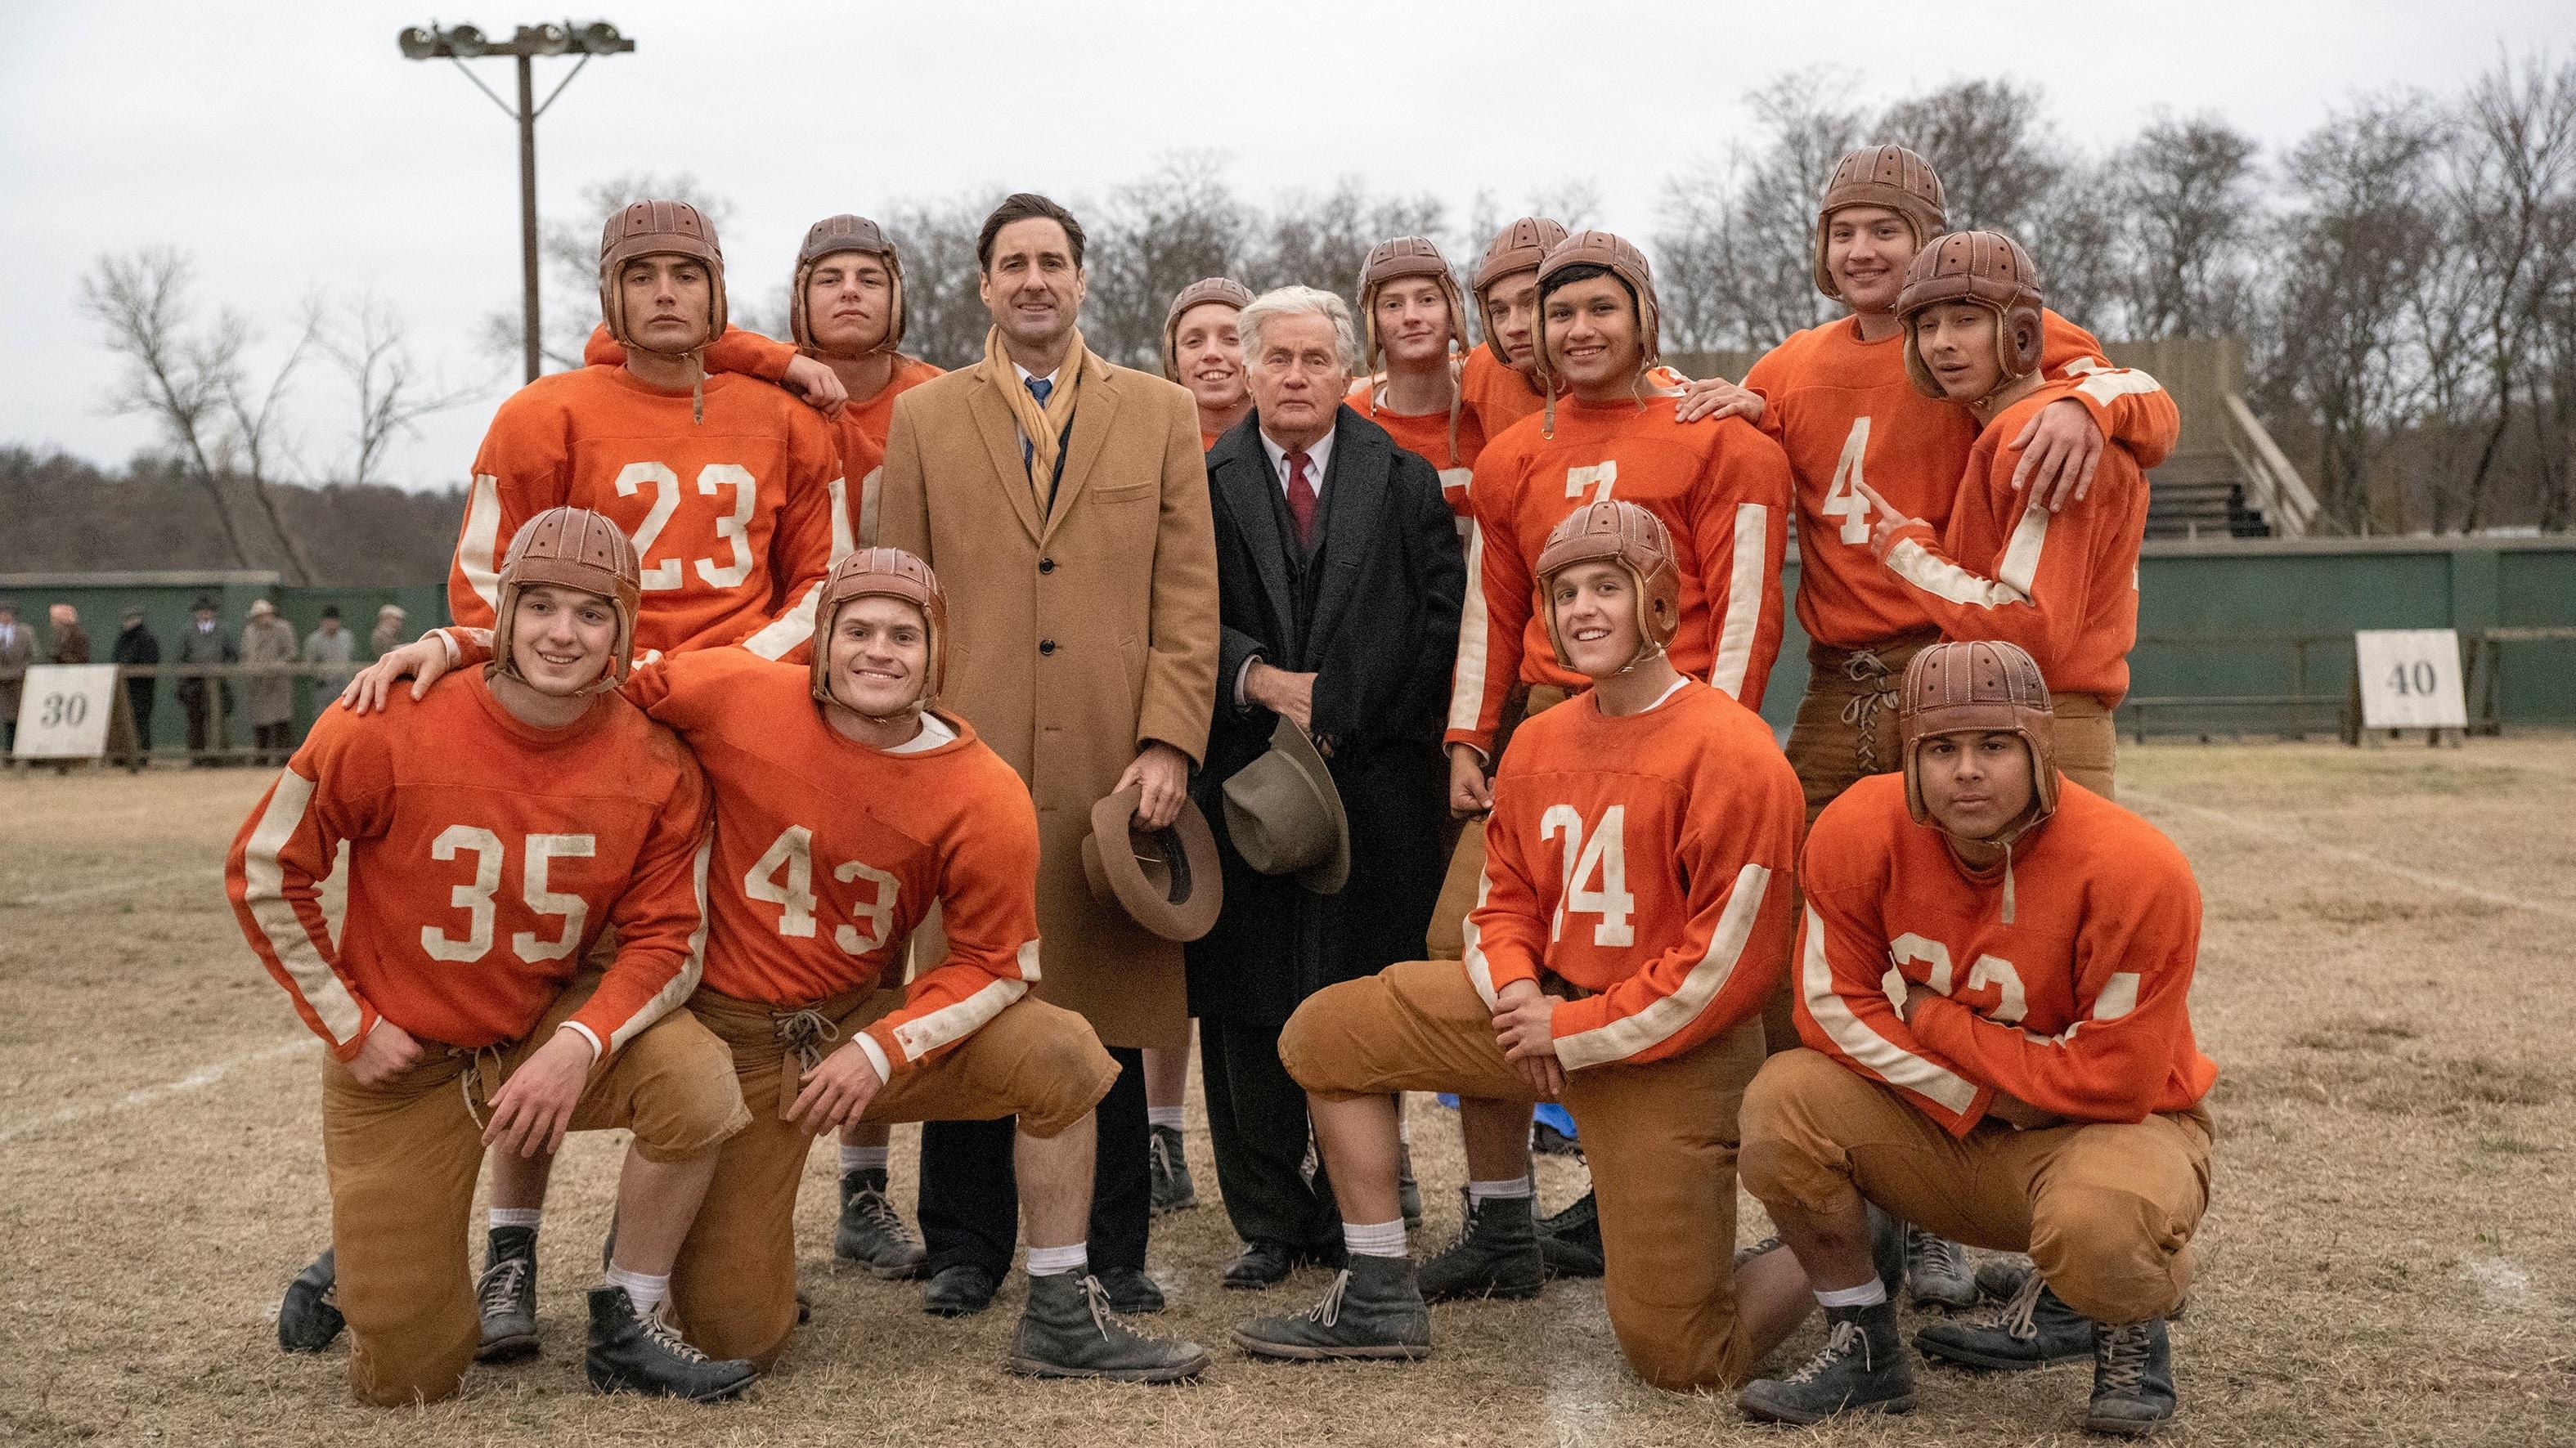 12 Mighty Orphans pulls at least a dozen clichés from the underdog sports movie playbook